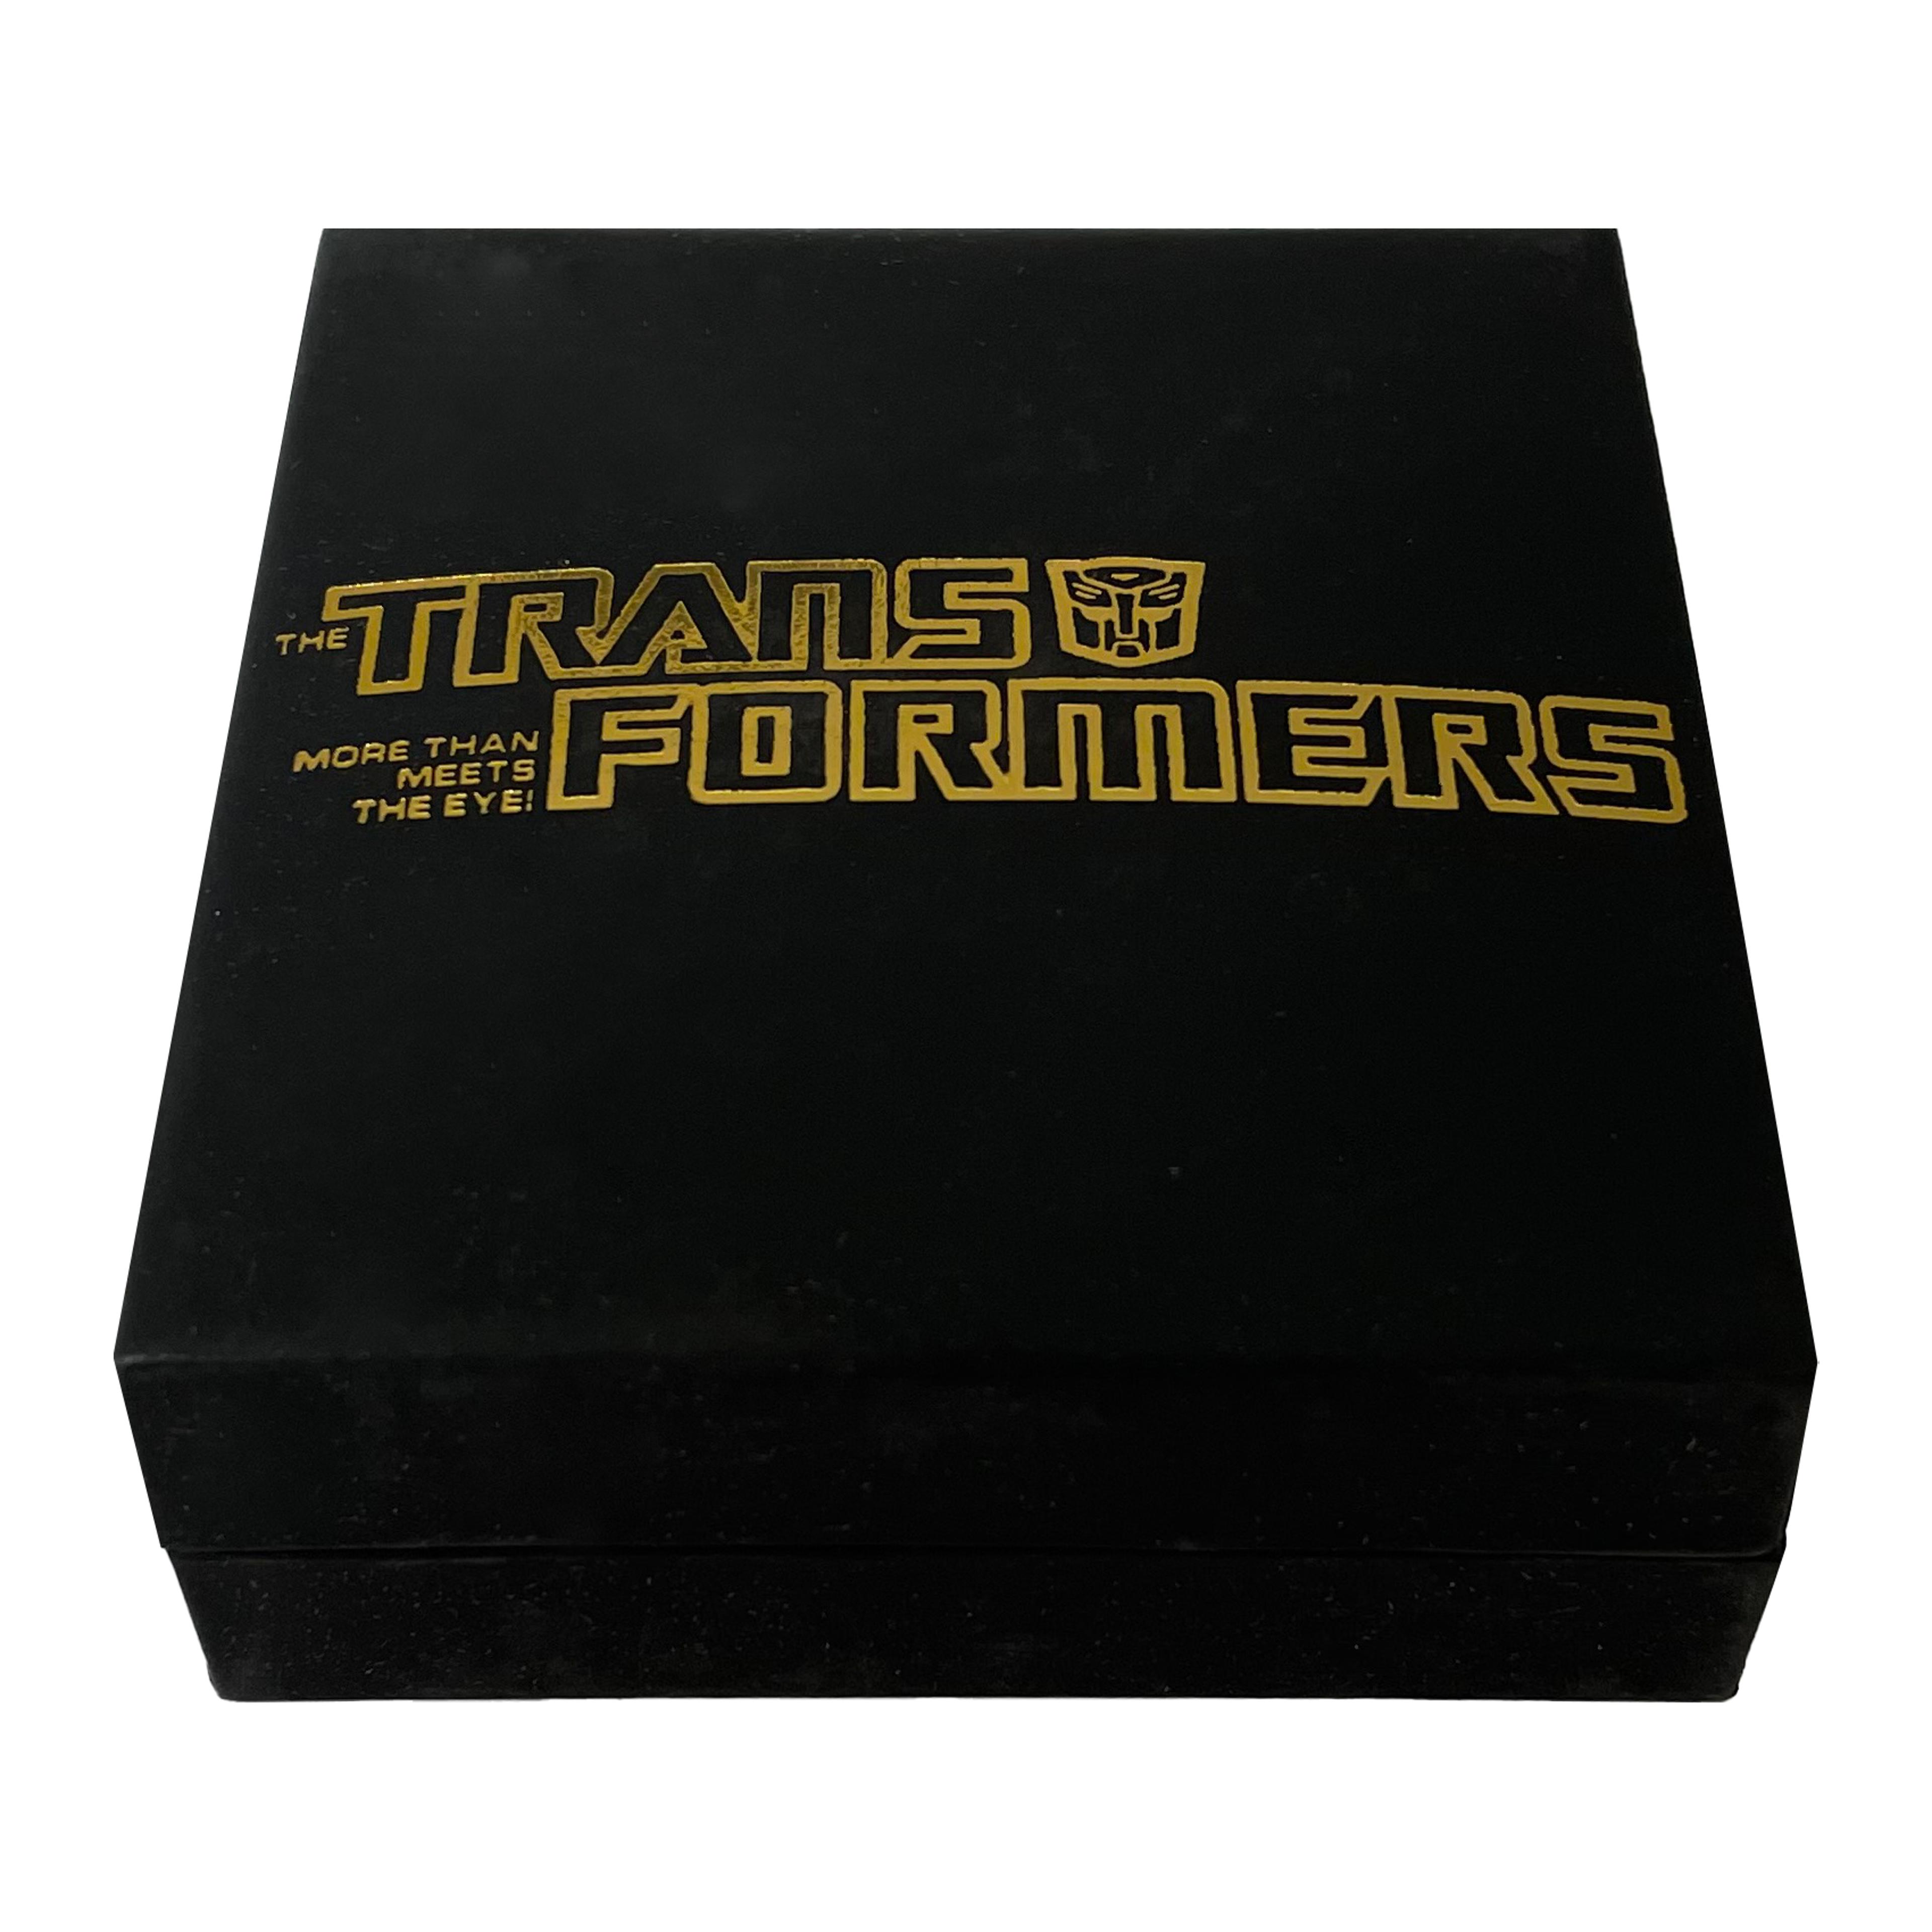 Alternate View 2 of Transformers Autobot X Decepticon 24K Gold Plated Pins Box Set (